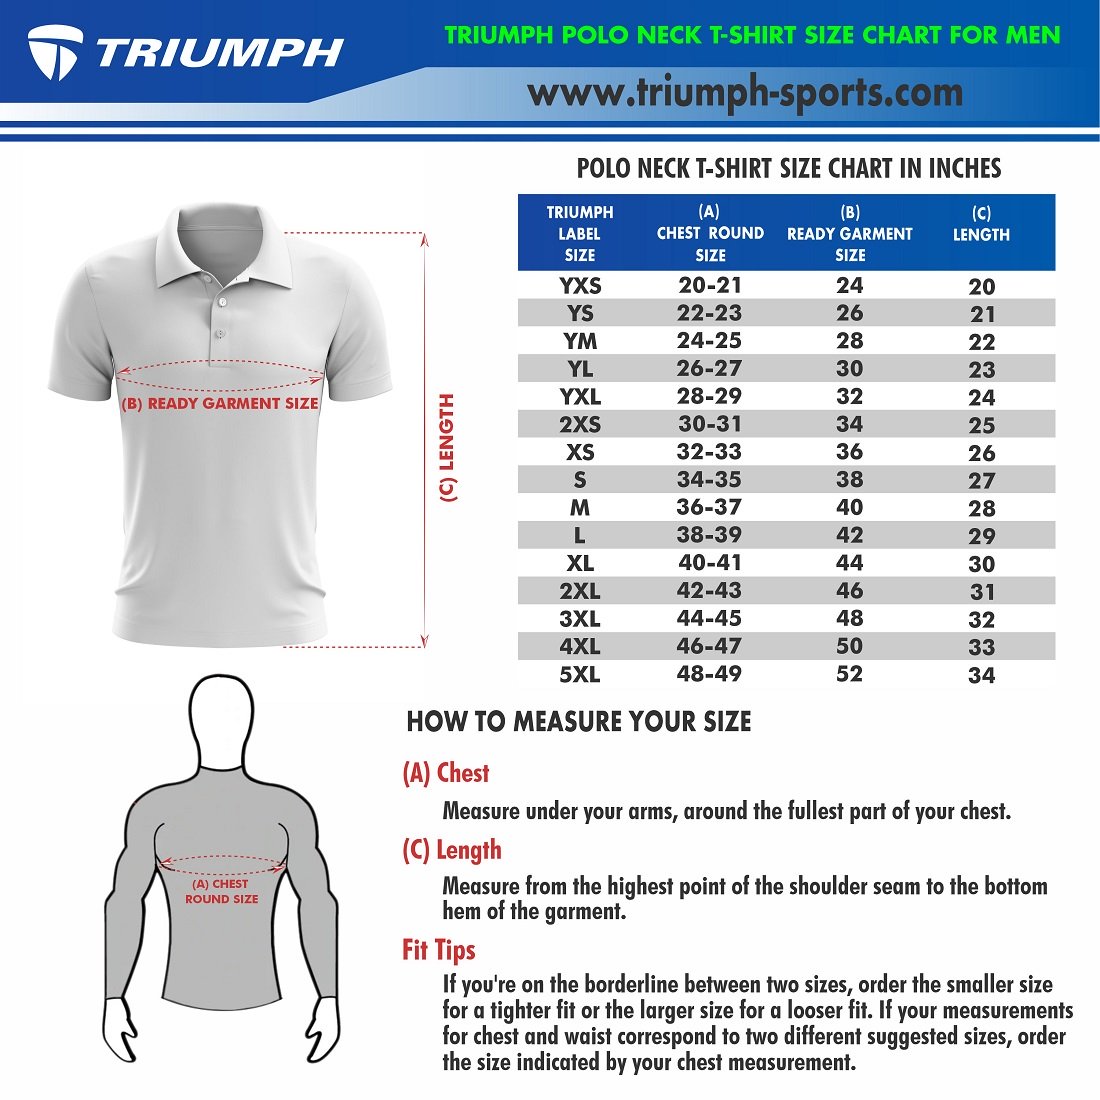 Polo Neck T-shirts Size Chart for MEN